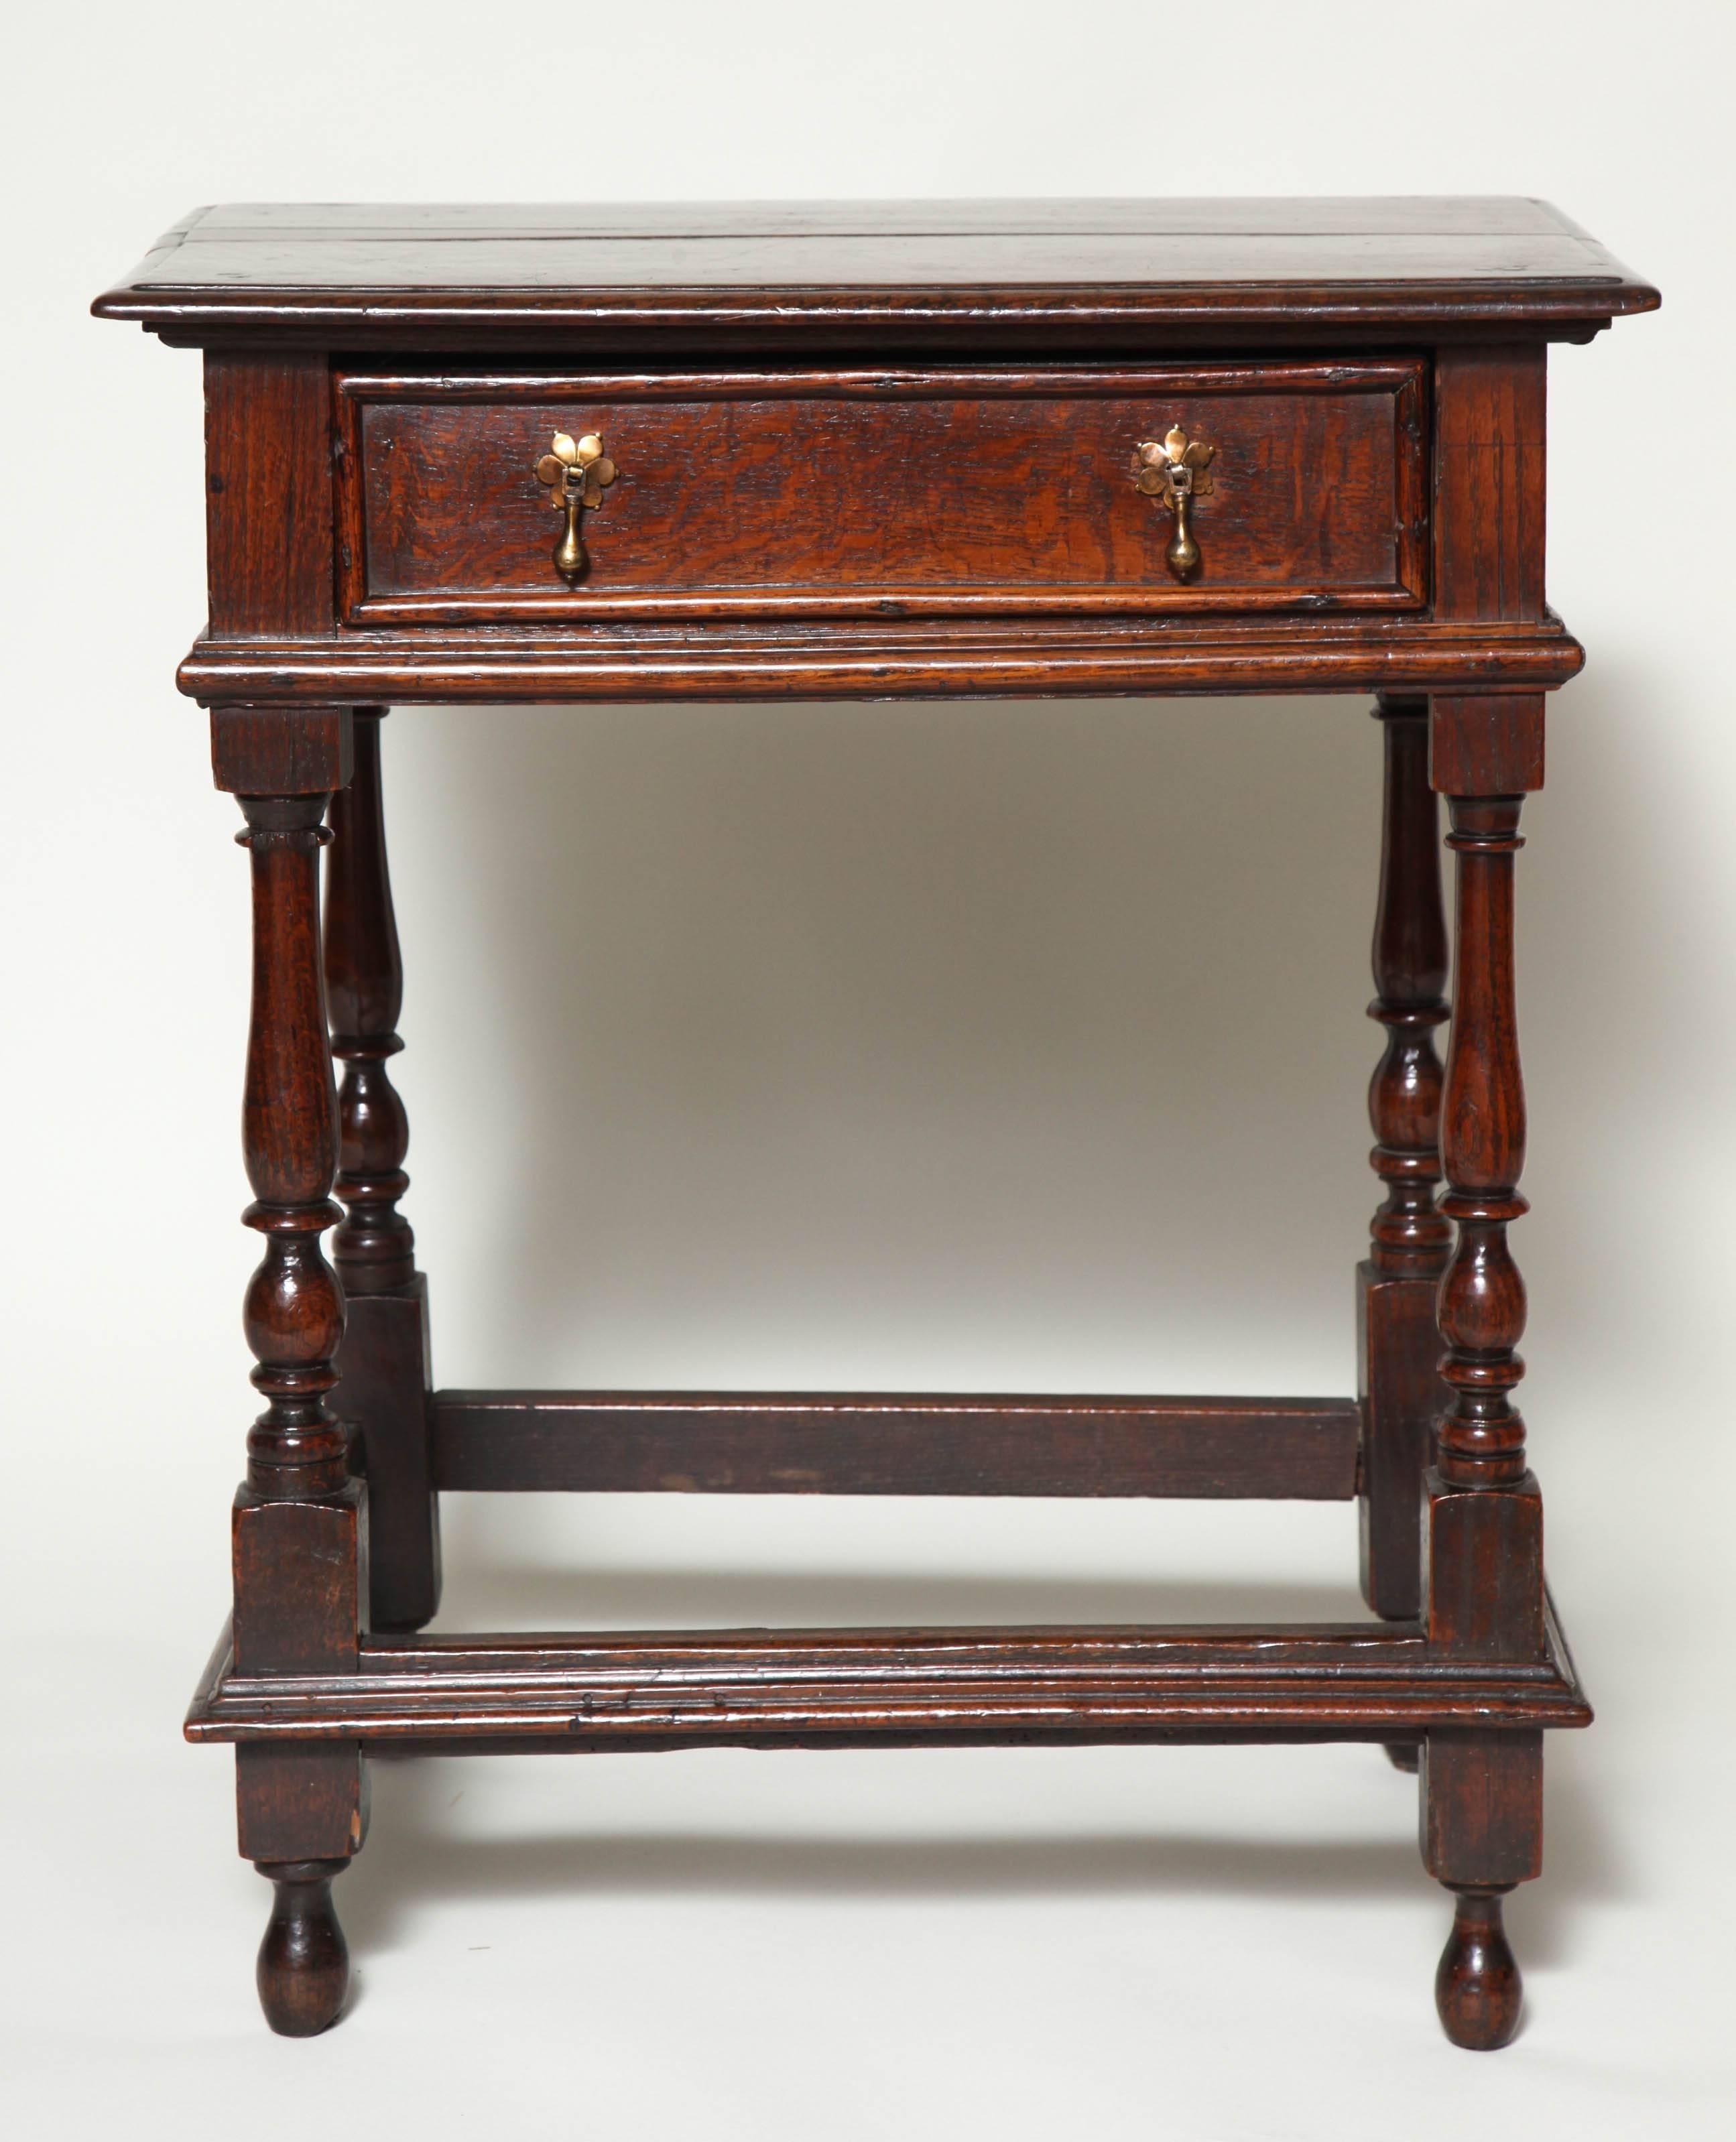 Late 17th century English oak side table with molded top over single molded front drawer with double tear drop pulls on boldly turned baluster legs joined by rare molded box stretcher and standing tall on original elongated bun feet. Nice